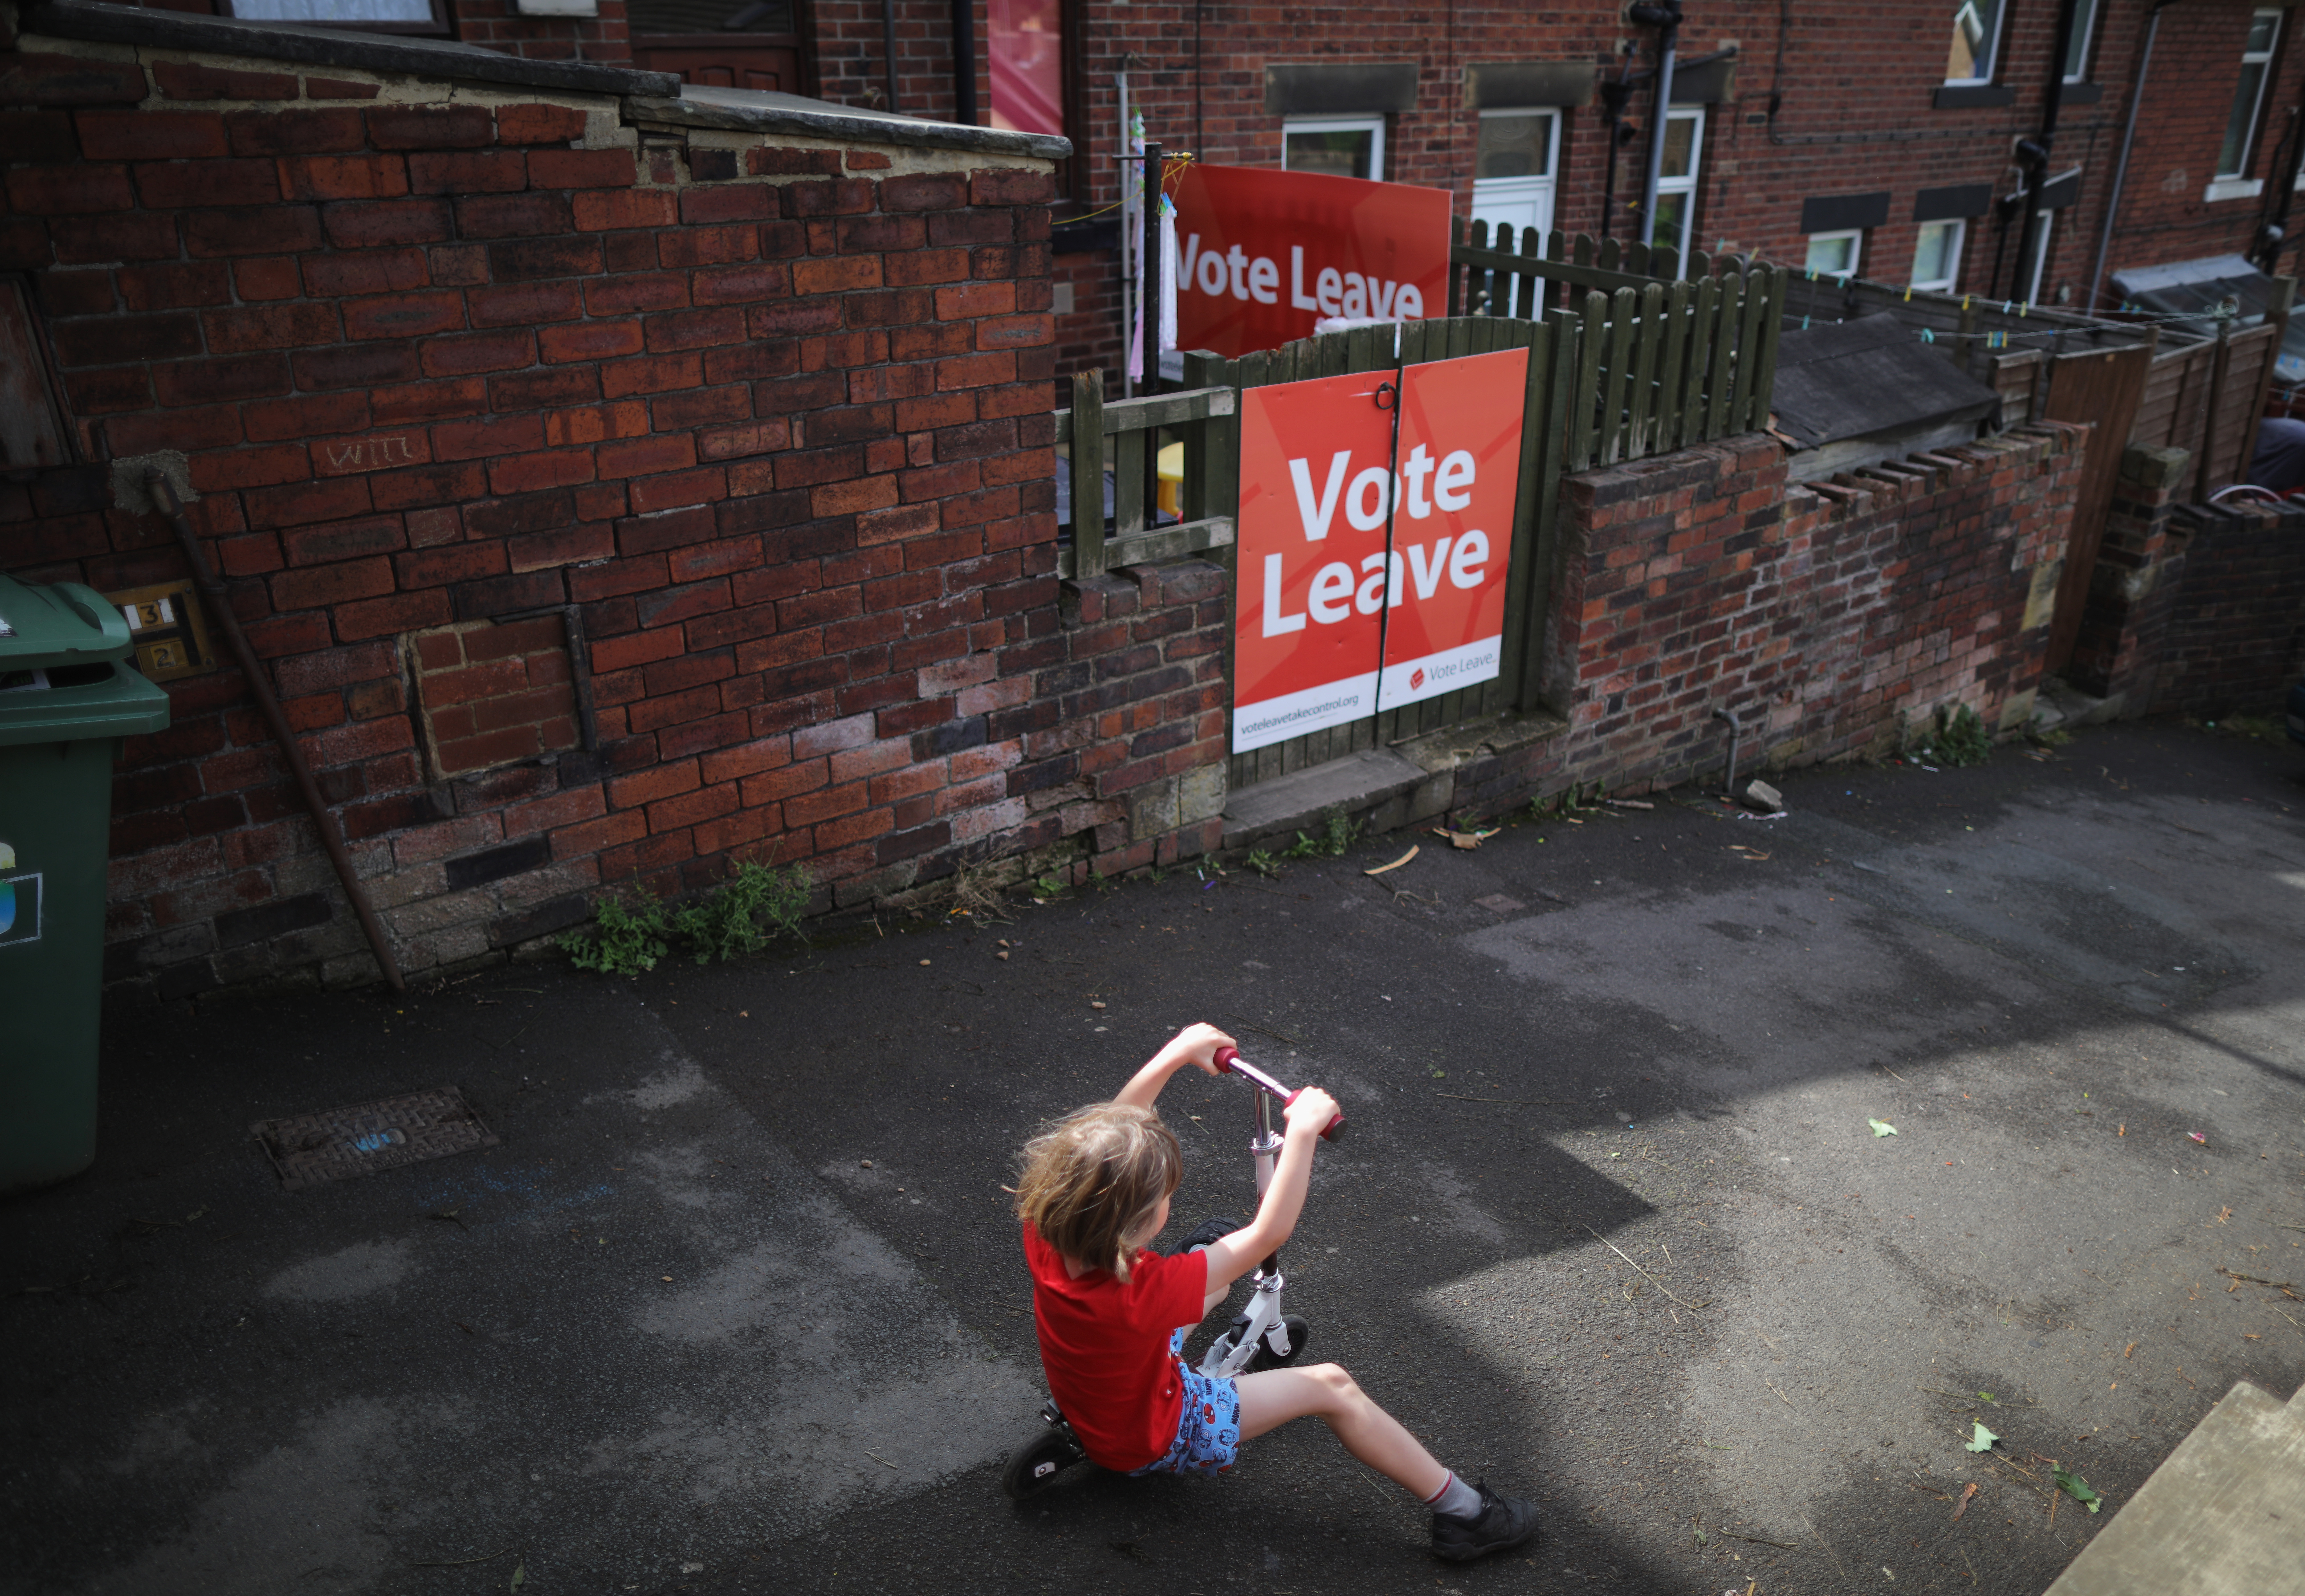 BATLEY, ENGLAND - JUNE 18: A young rides his scooter past a 'Vote Leave' poster in the back alley next to his home in the West Yorkshire town of Batley, in the constituency of murdered MP Jo Cox on June 18, 2016 in Batley, United Kingdom. The Labour MP for Batley and Spen was about to hold her weekly constituency surgery in Birstall Library last Thursday (June 16, 2016) when she was shot and stabbed in the street. (Photo by Christopher Furlong/Getty Images)